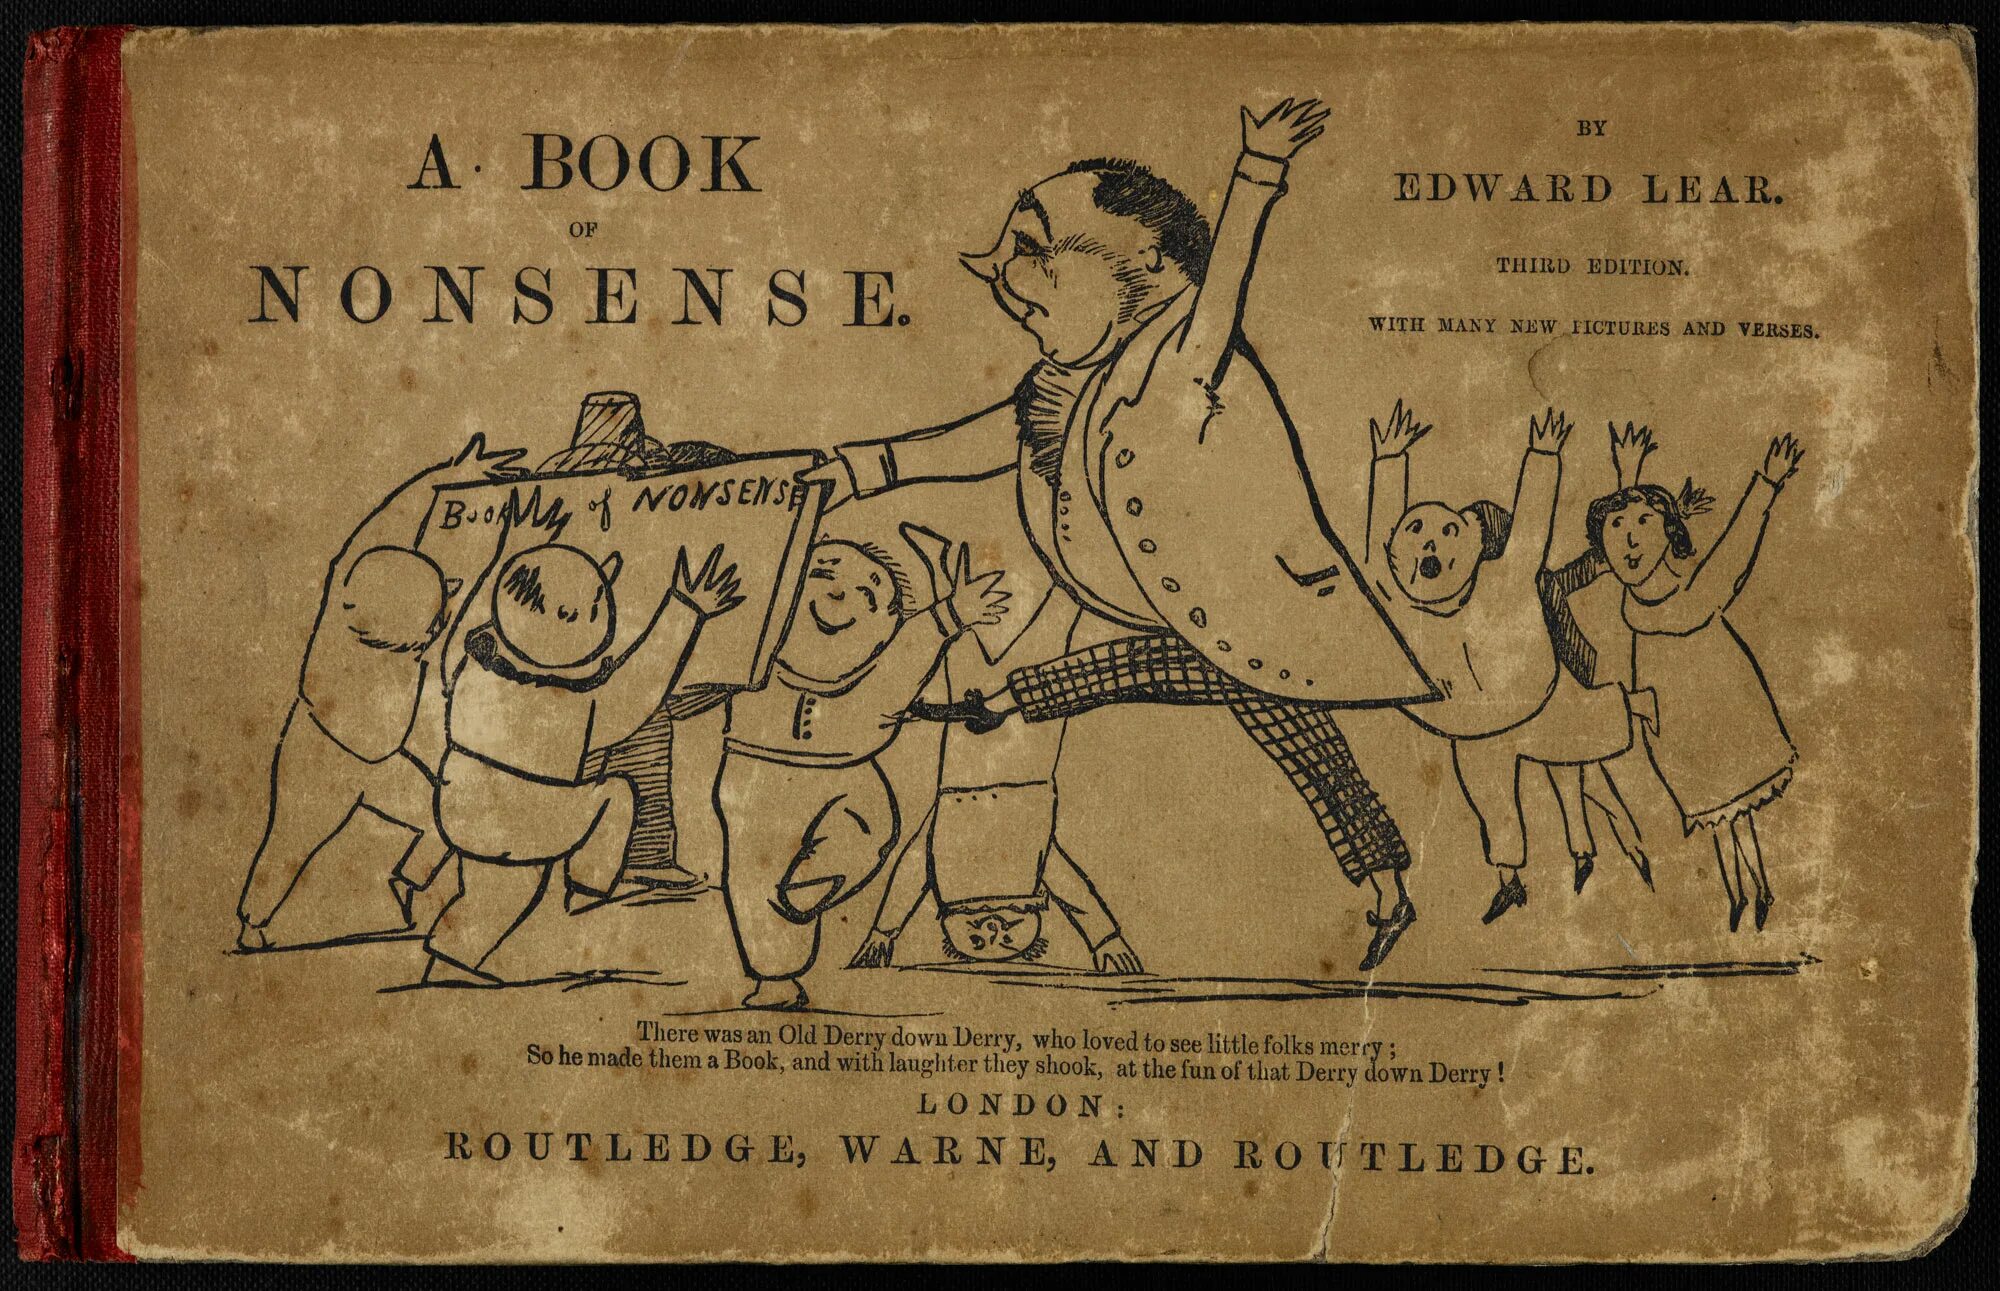 Did you saw a book. A book of nonsense Edward Lear.